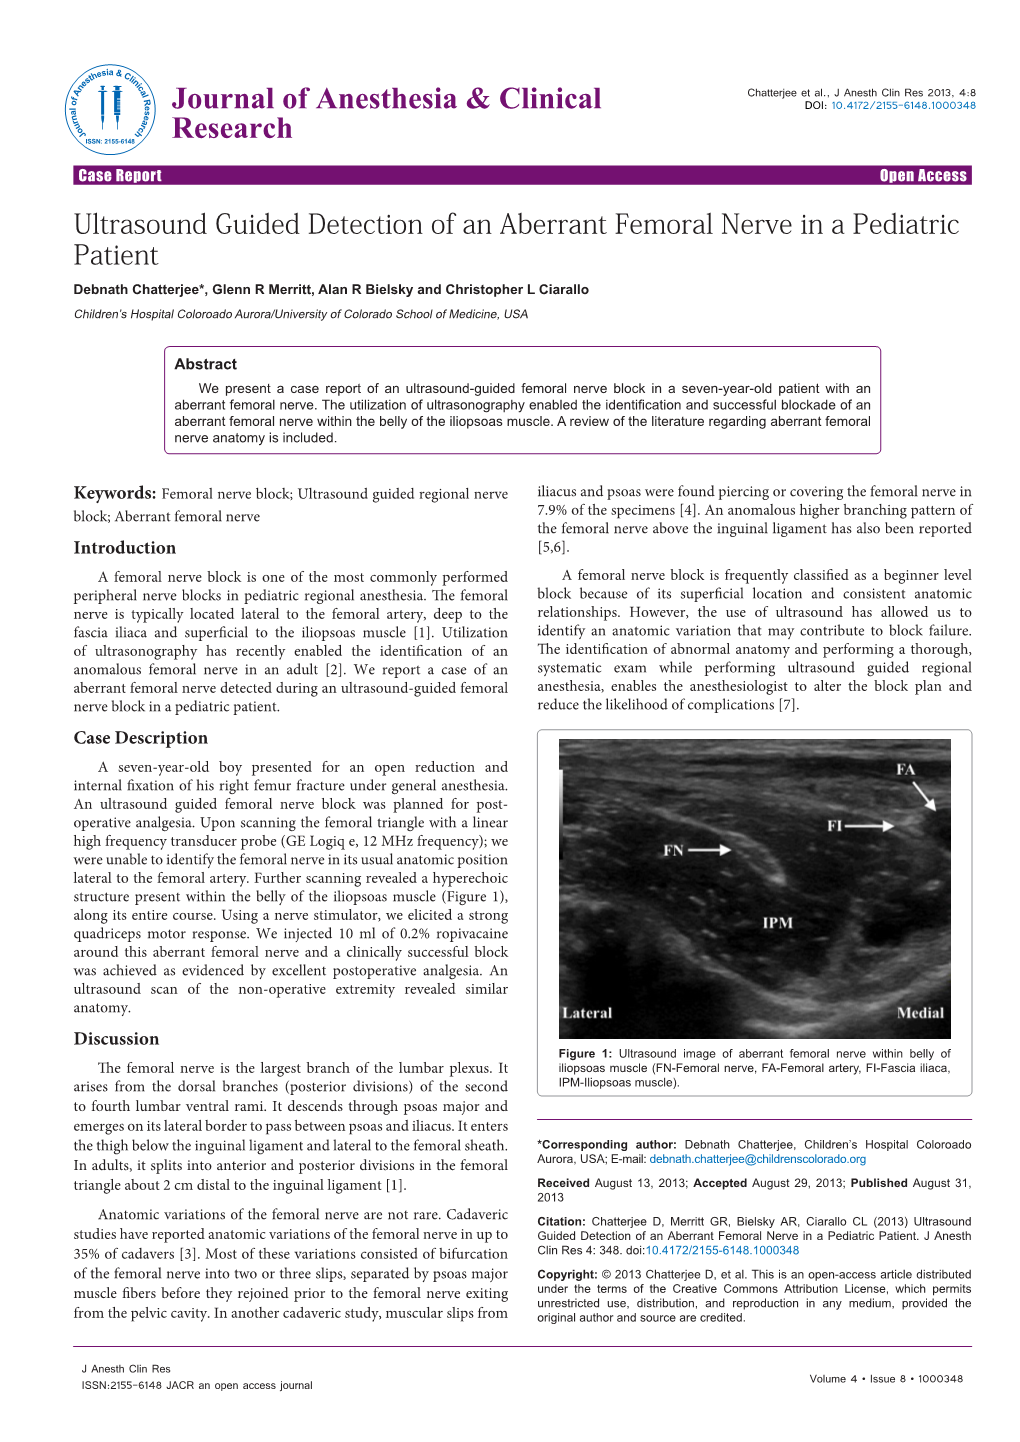 Ultrasound Guided Detection of an Aberrant Femoral Nerve in a Pediatric Patient